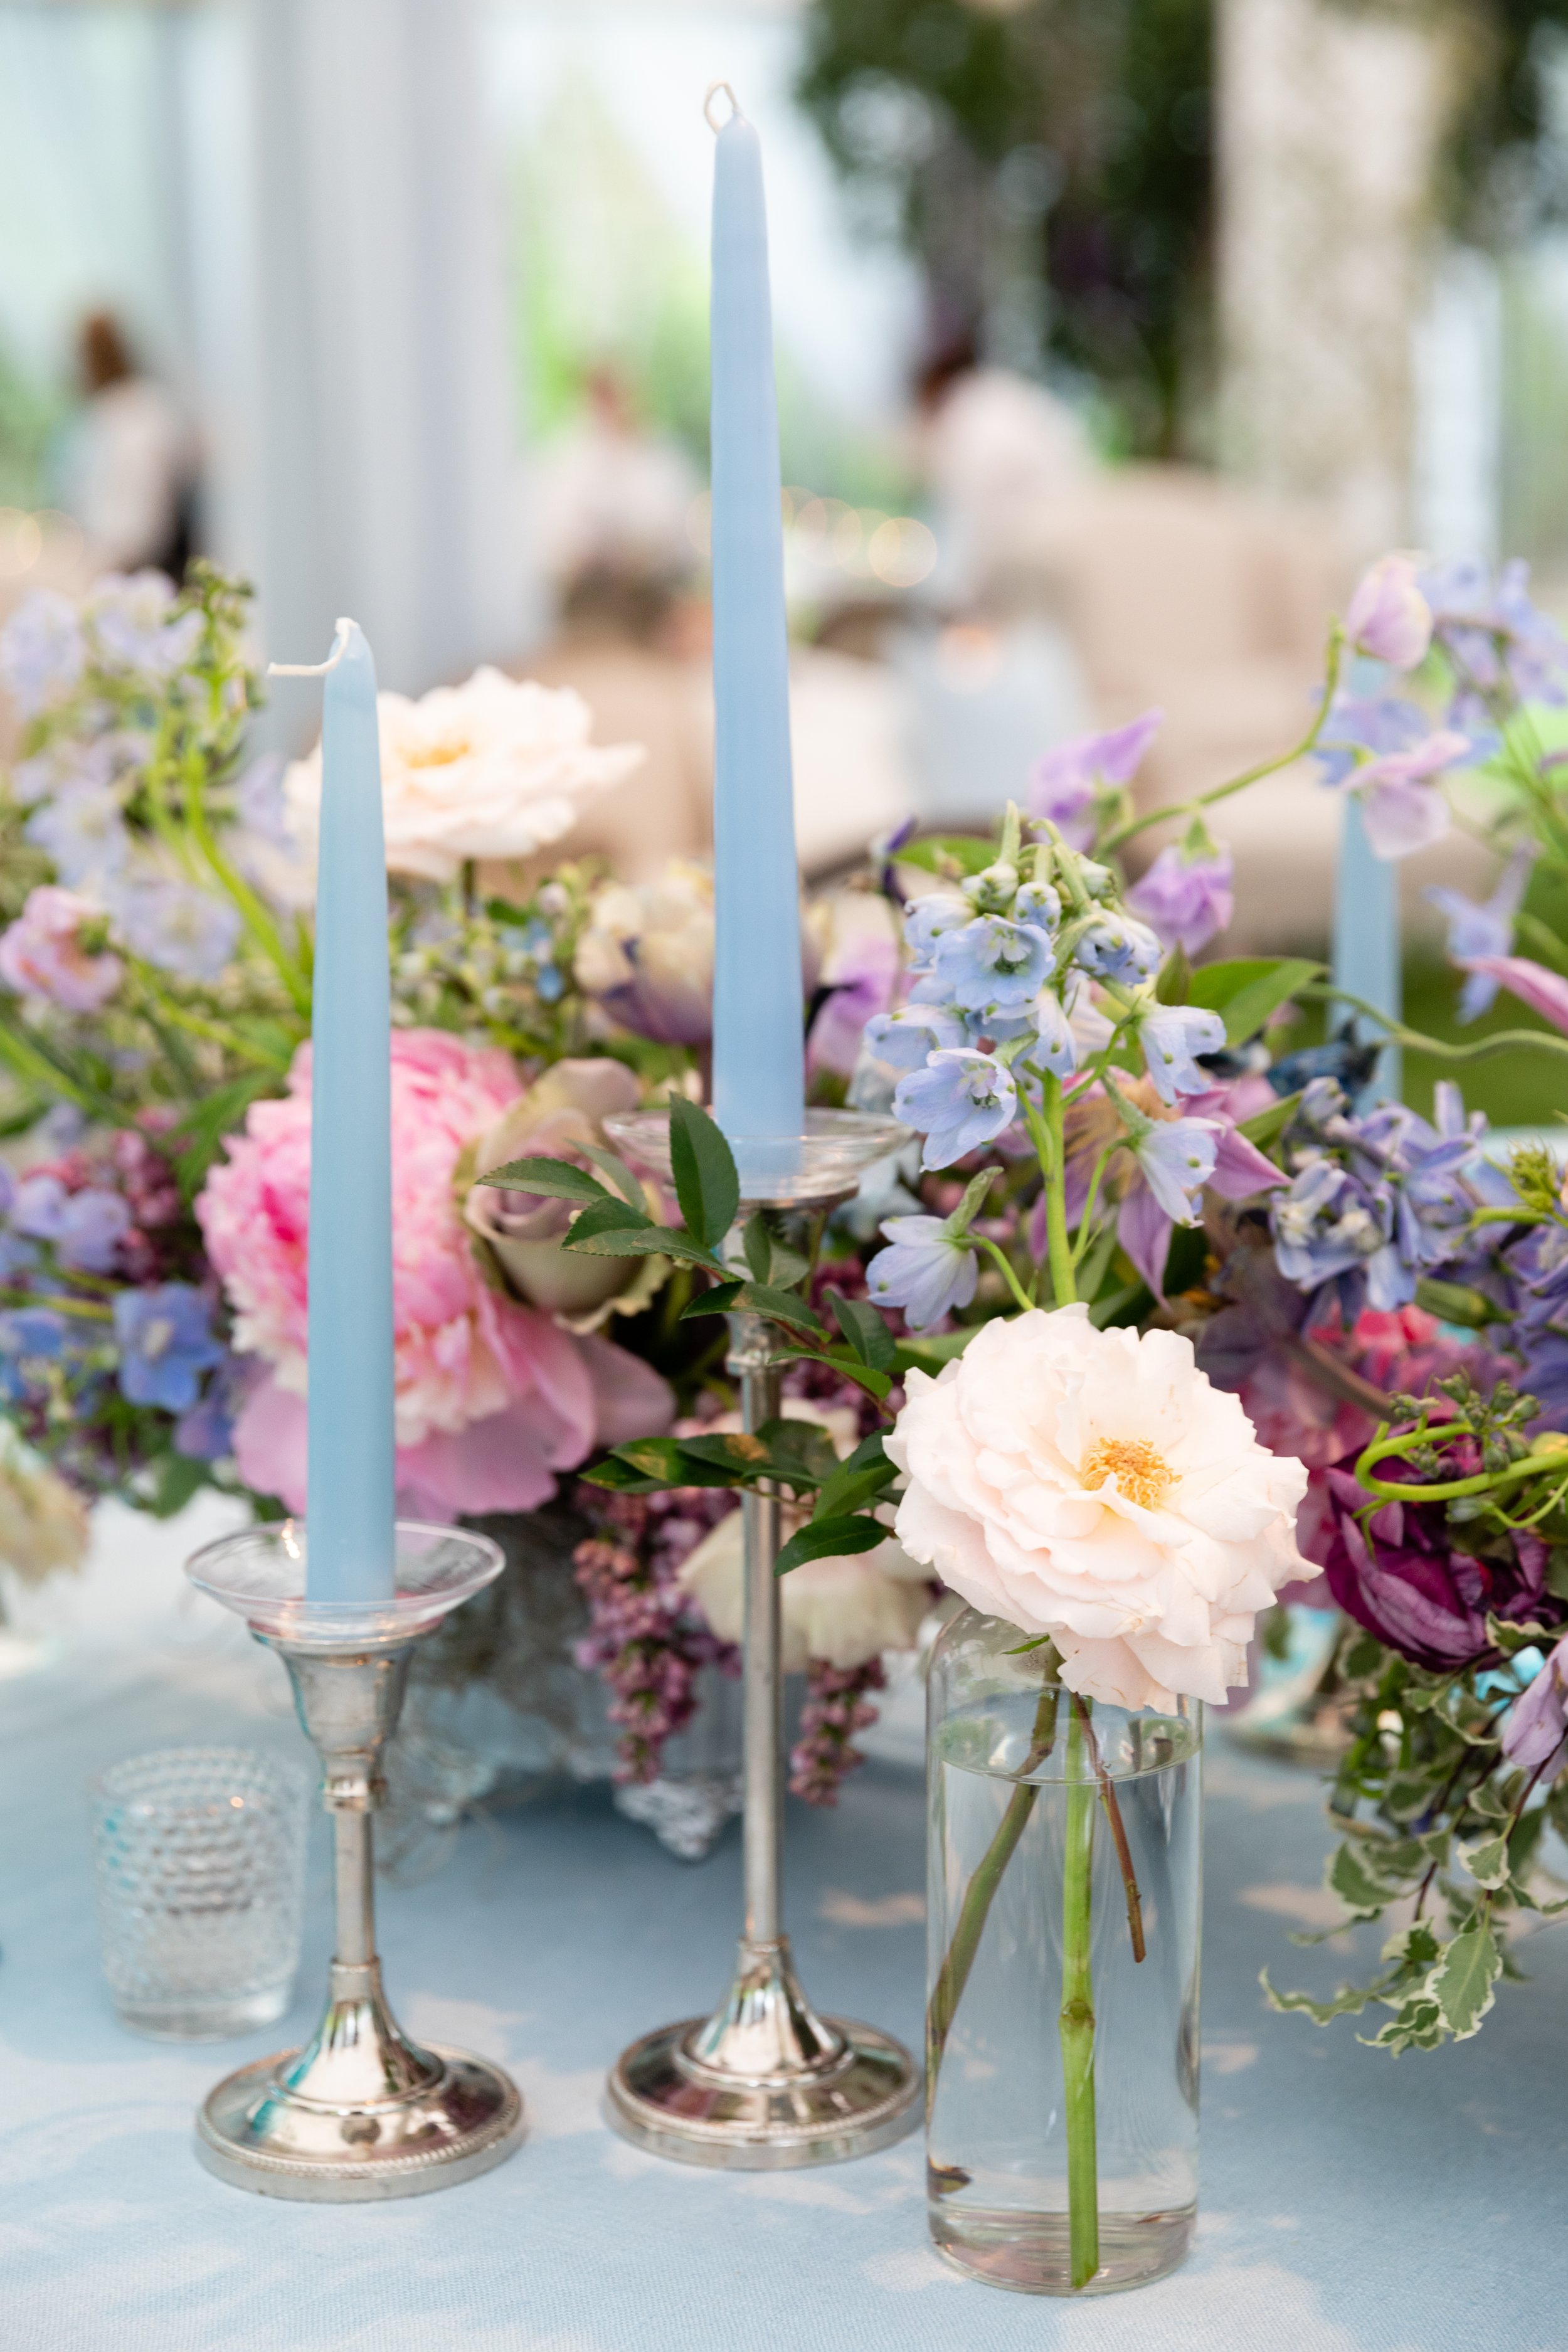 Growing, fresh floral centerpieces with blush garden roses, lilac, blue sweet peas, ranunculus, lavender delphinium, globe allium, clematis, and natural greenery for a tented Bridgerton inspired engagement party at a private home in Nashville, TN.